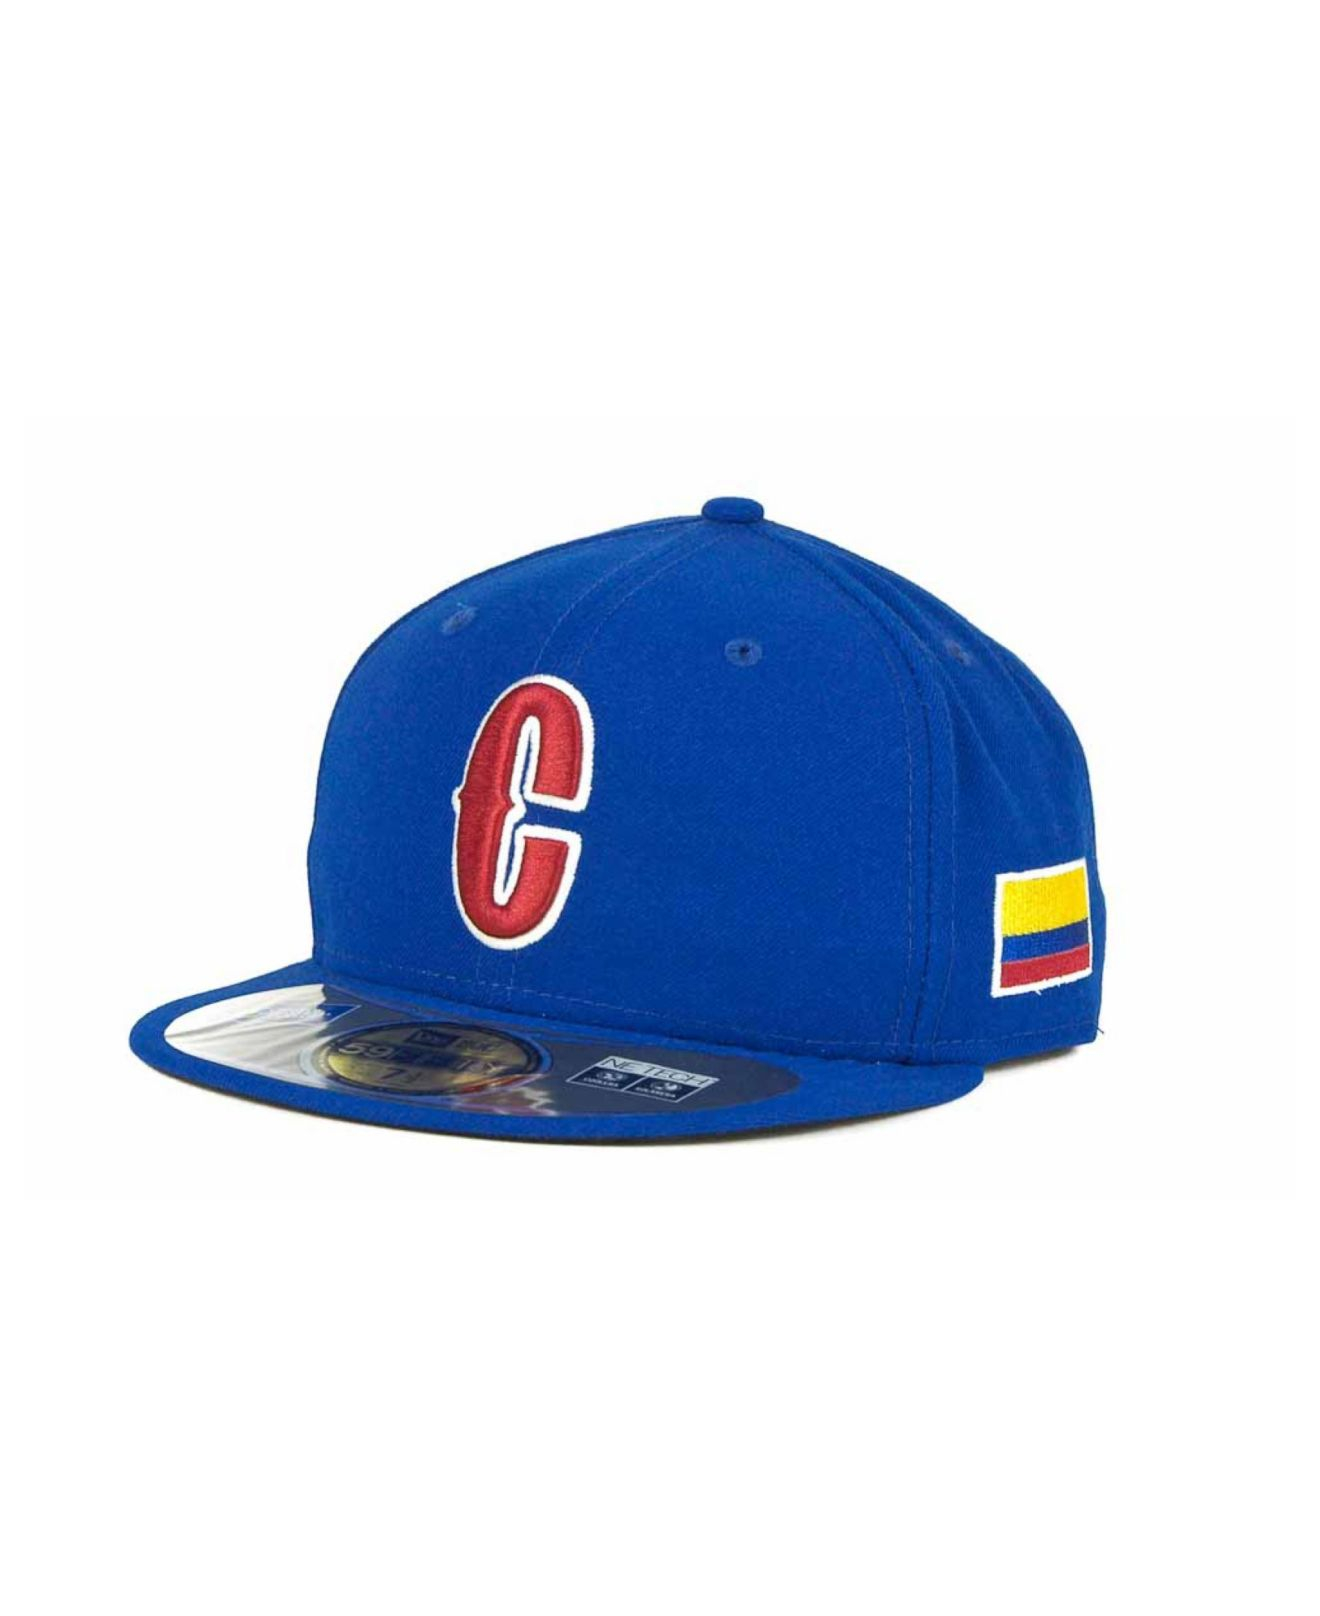 KTZ Colombia 2013 World Baseball Classic 59Fifty Cap in Blue for